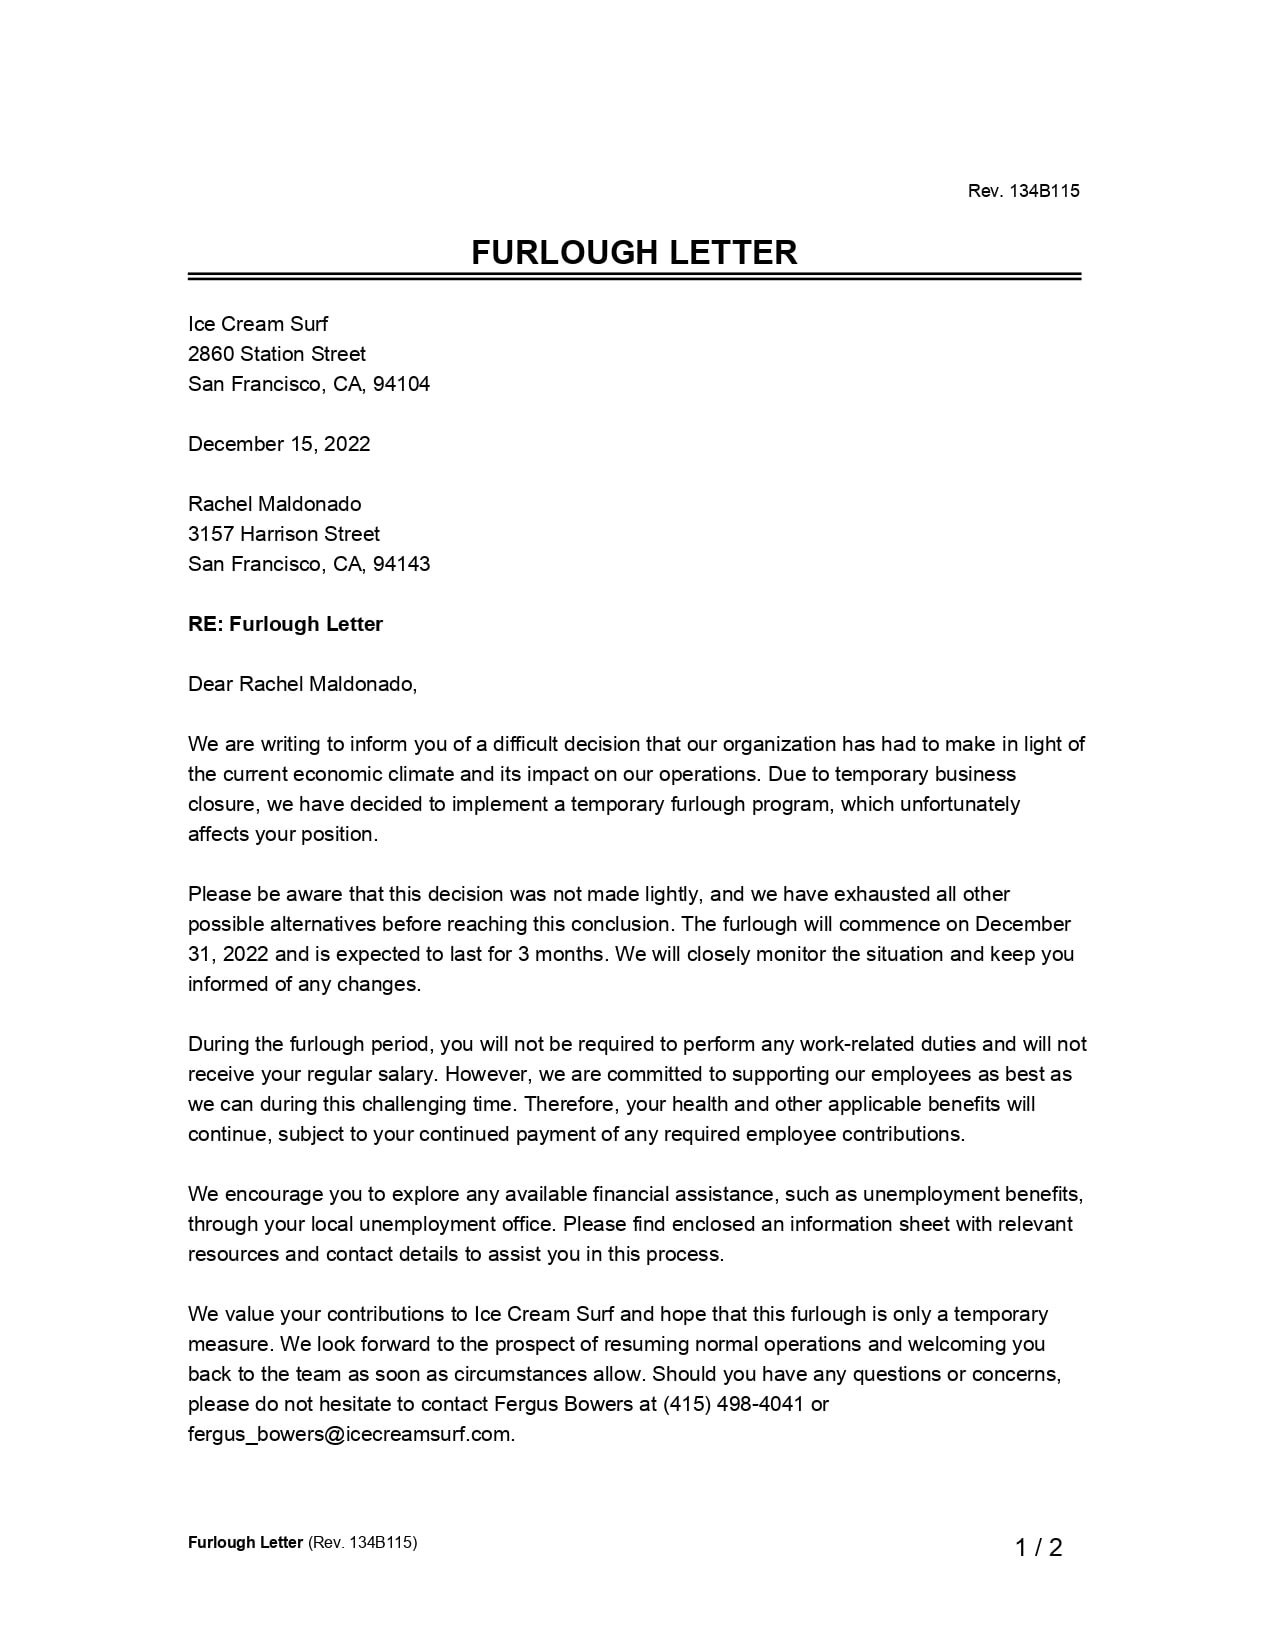 Furlough Letter example page 1